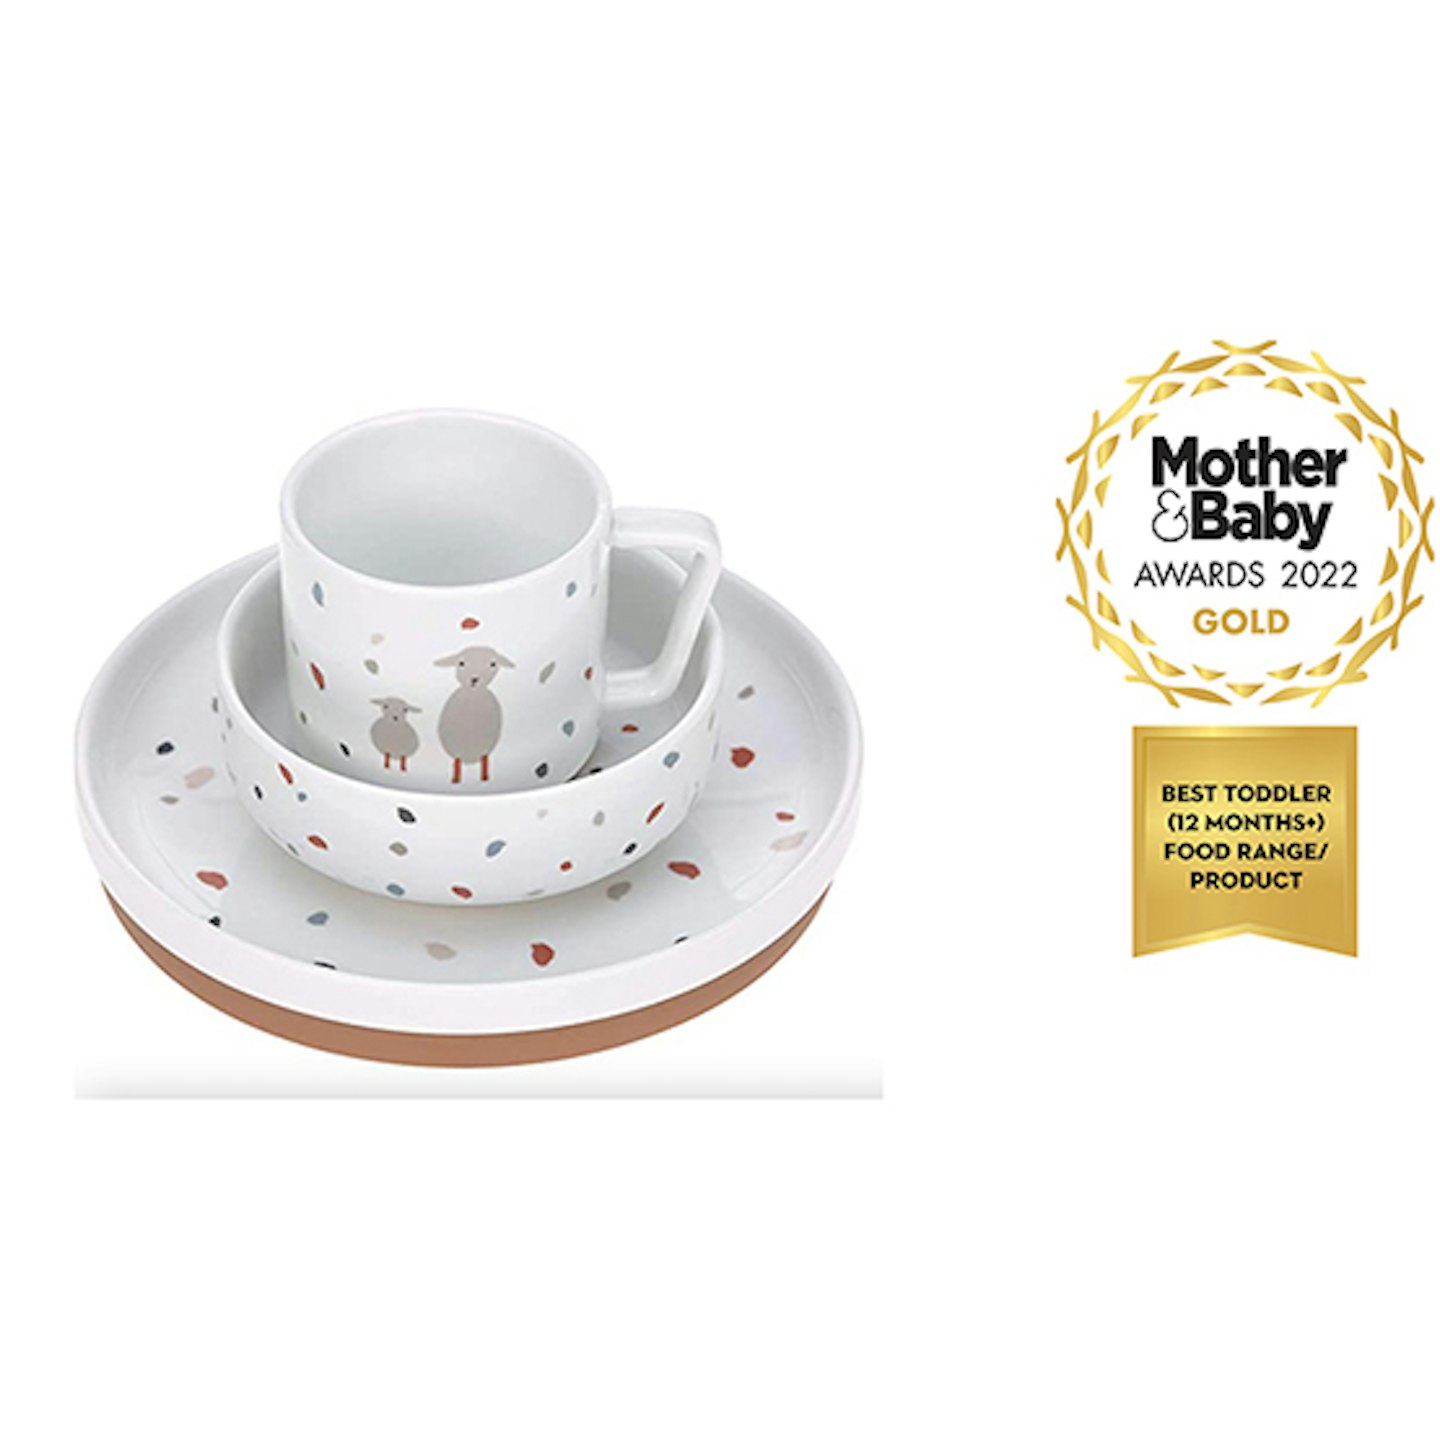 Best Dish Sets for Babies and Toddlers